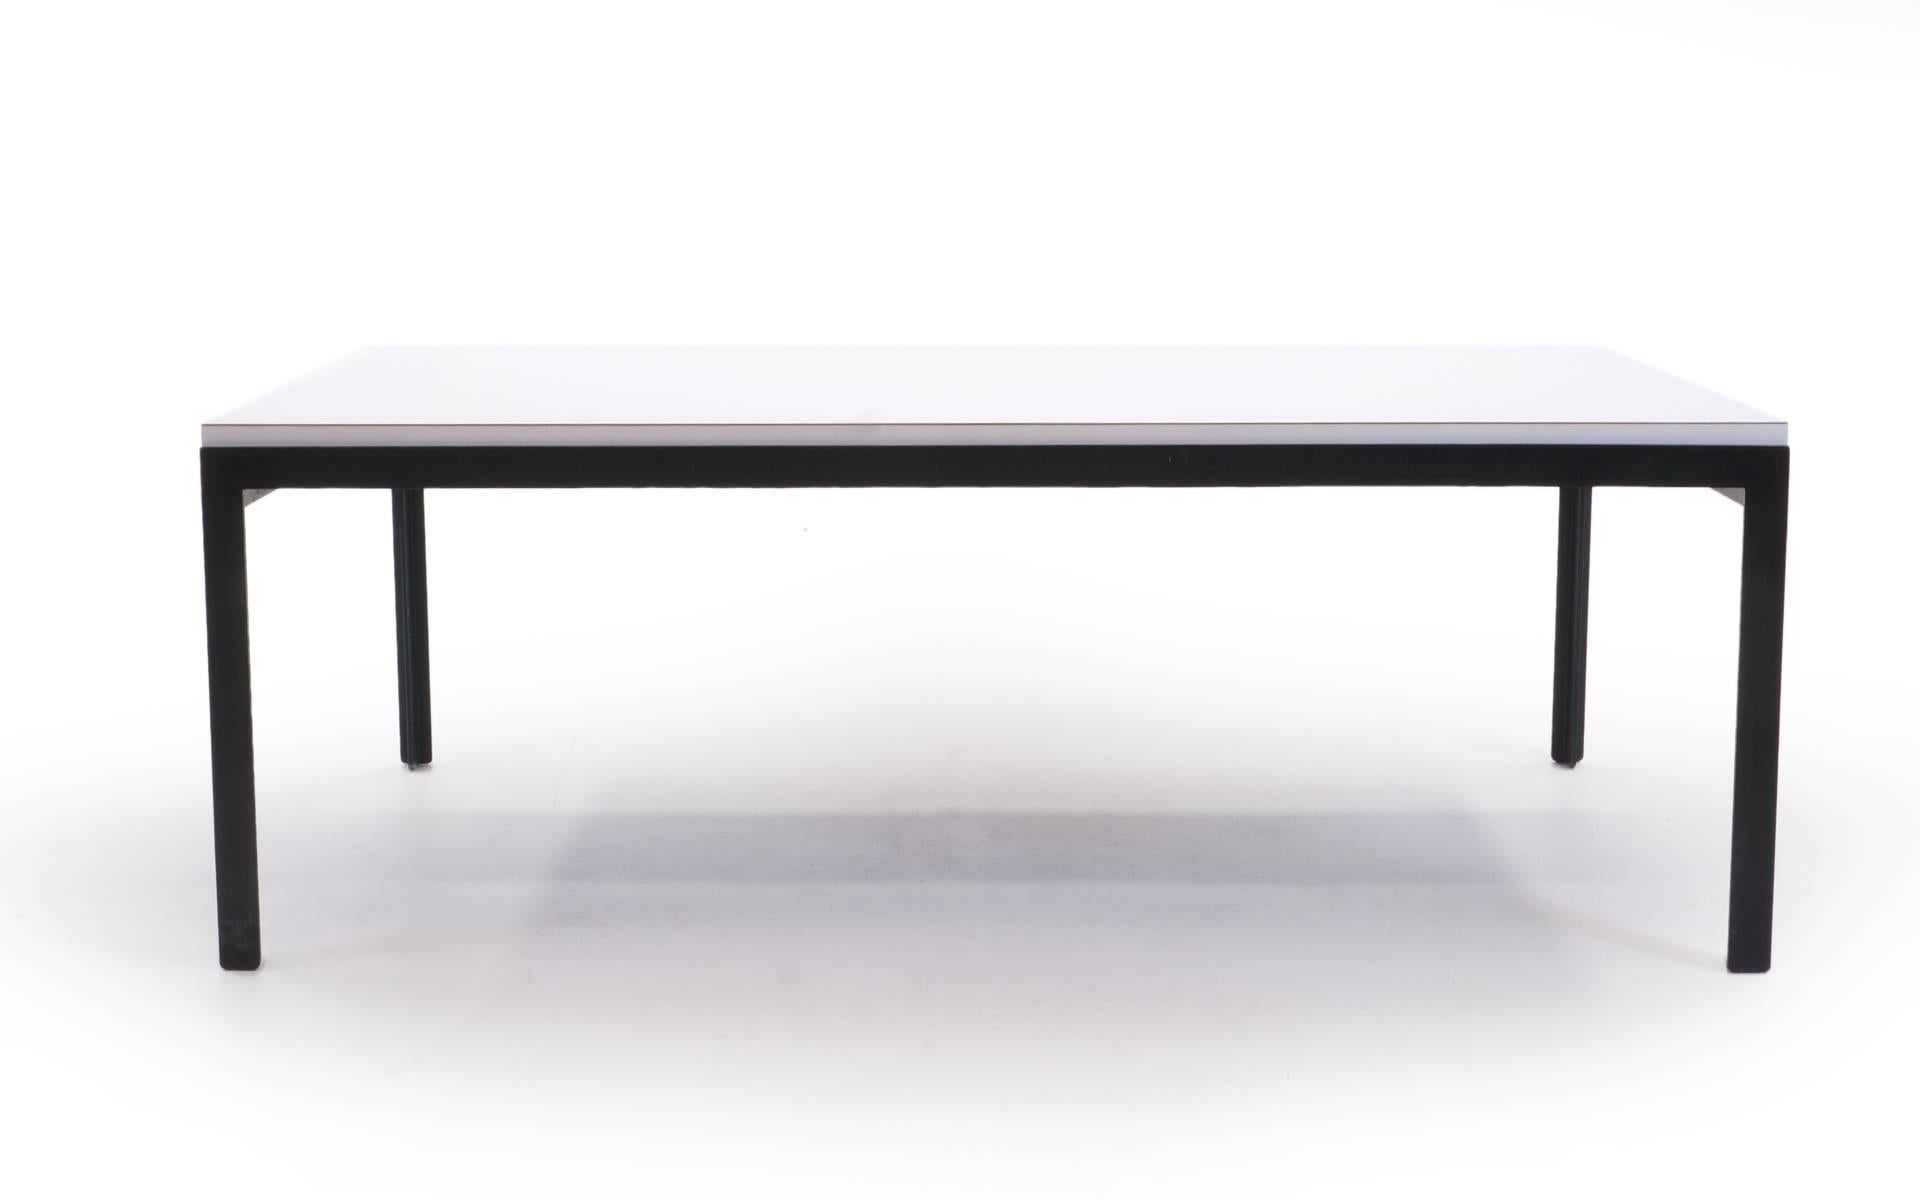 Signed Florence Knoll cocktail table. Original white laminate and lacquered steel legs and frame. Very heavy duty construction and super durable.